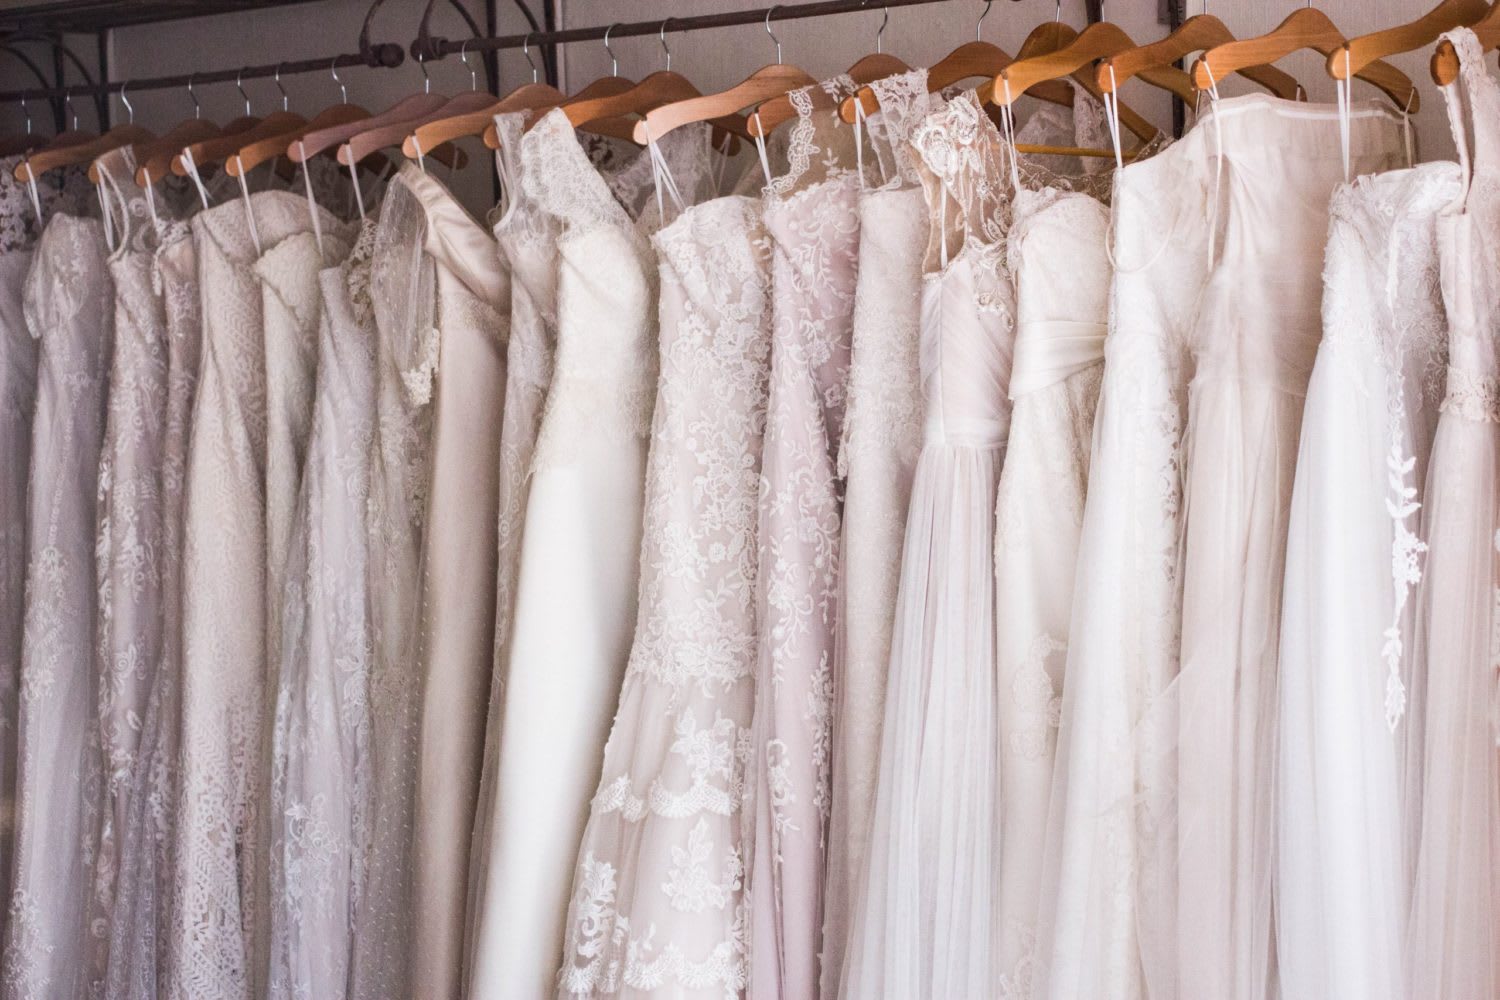 Save Money With a Wedding Dress Rental - Money Saved Is Money Earned